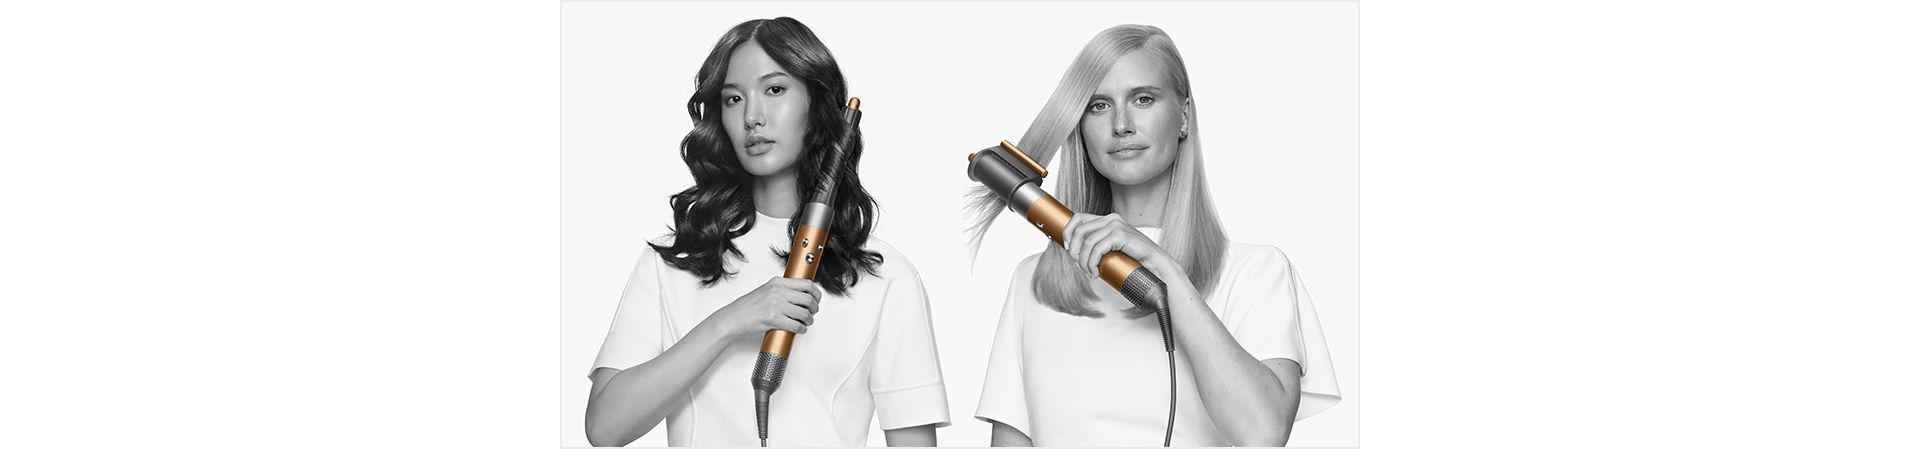 Two models using the Dyson Airwrap multi-styler, with a barrel attachment and the Coanda smoothing dryer attachment.